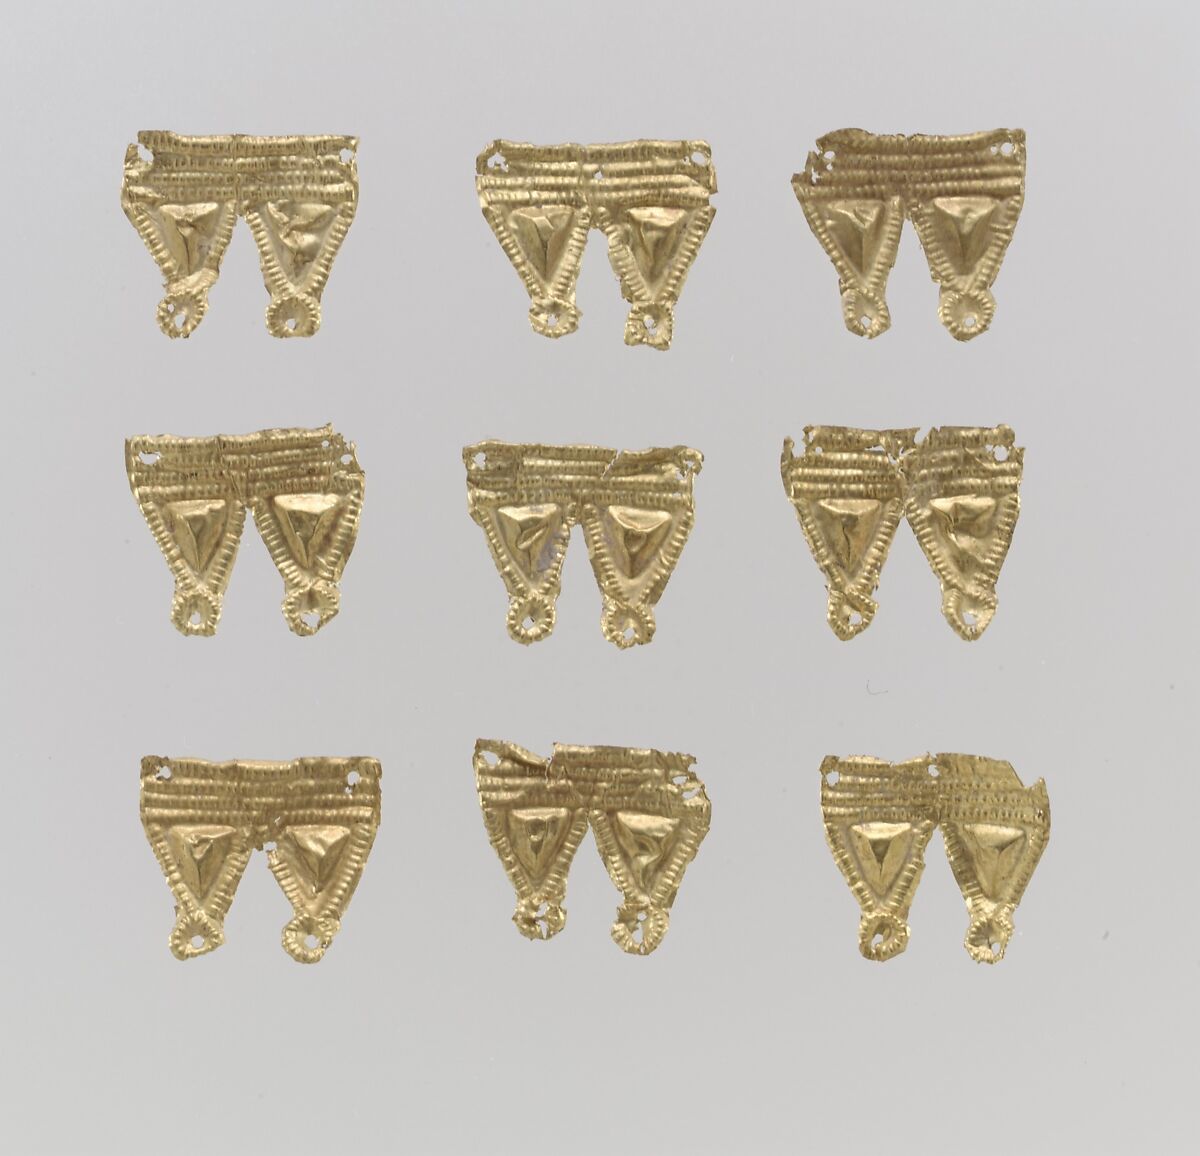 Bead ornaments, two triangles joined, 25, Gold, East Germanic or nomadic (?) 